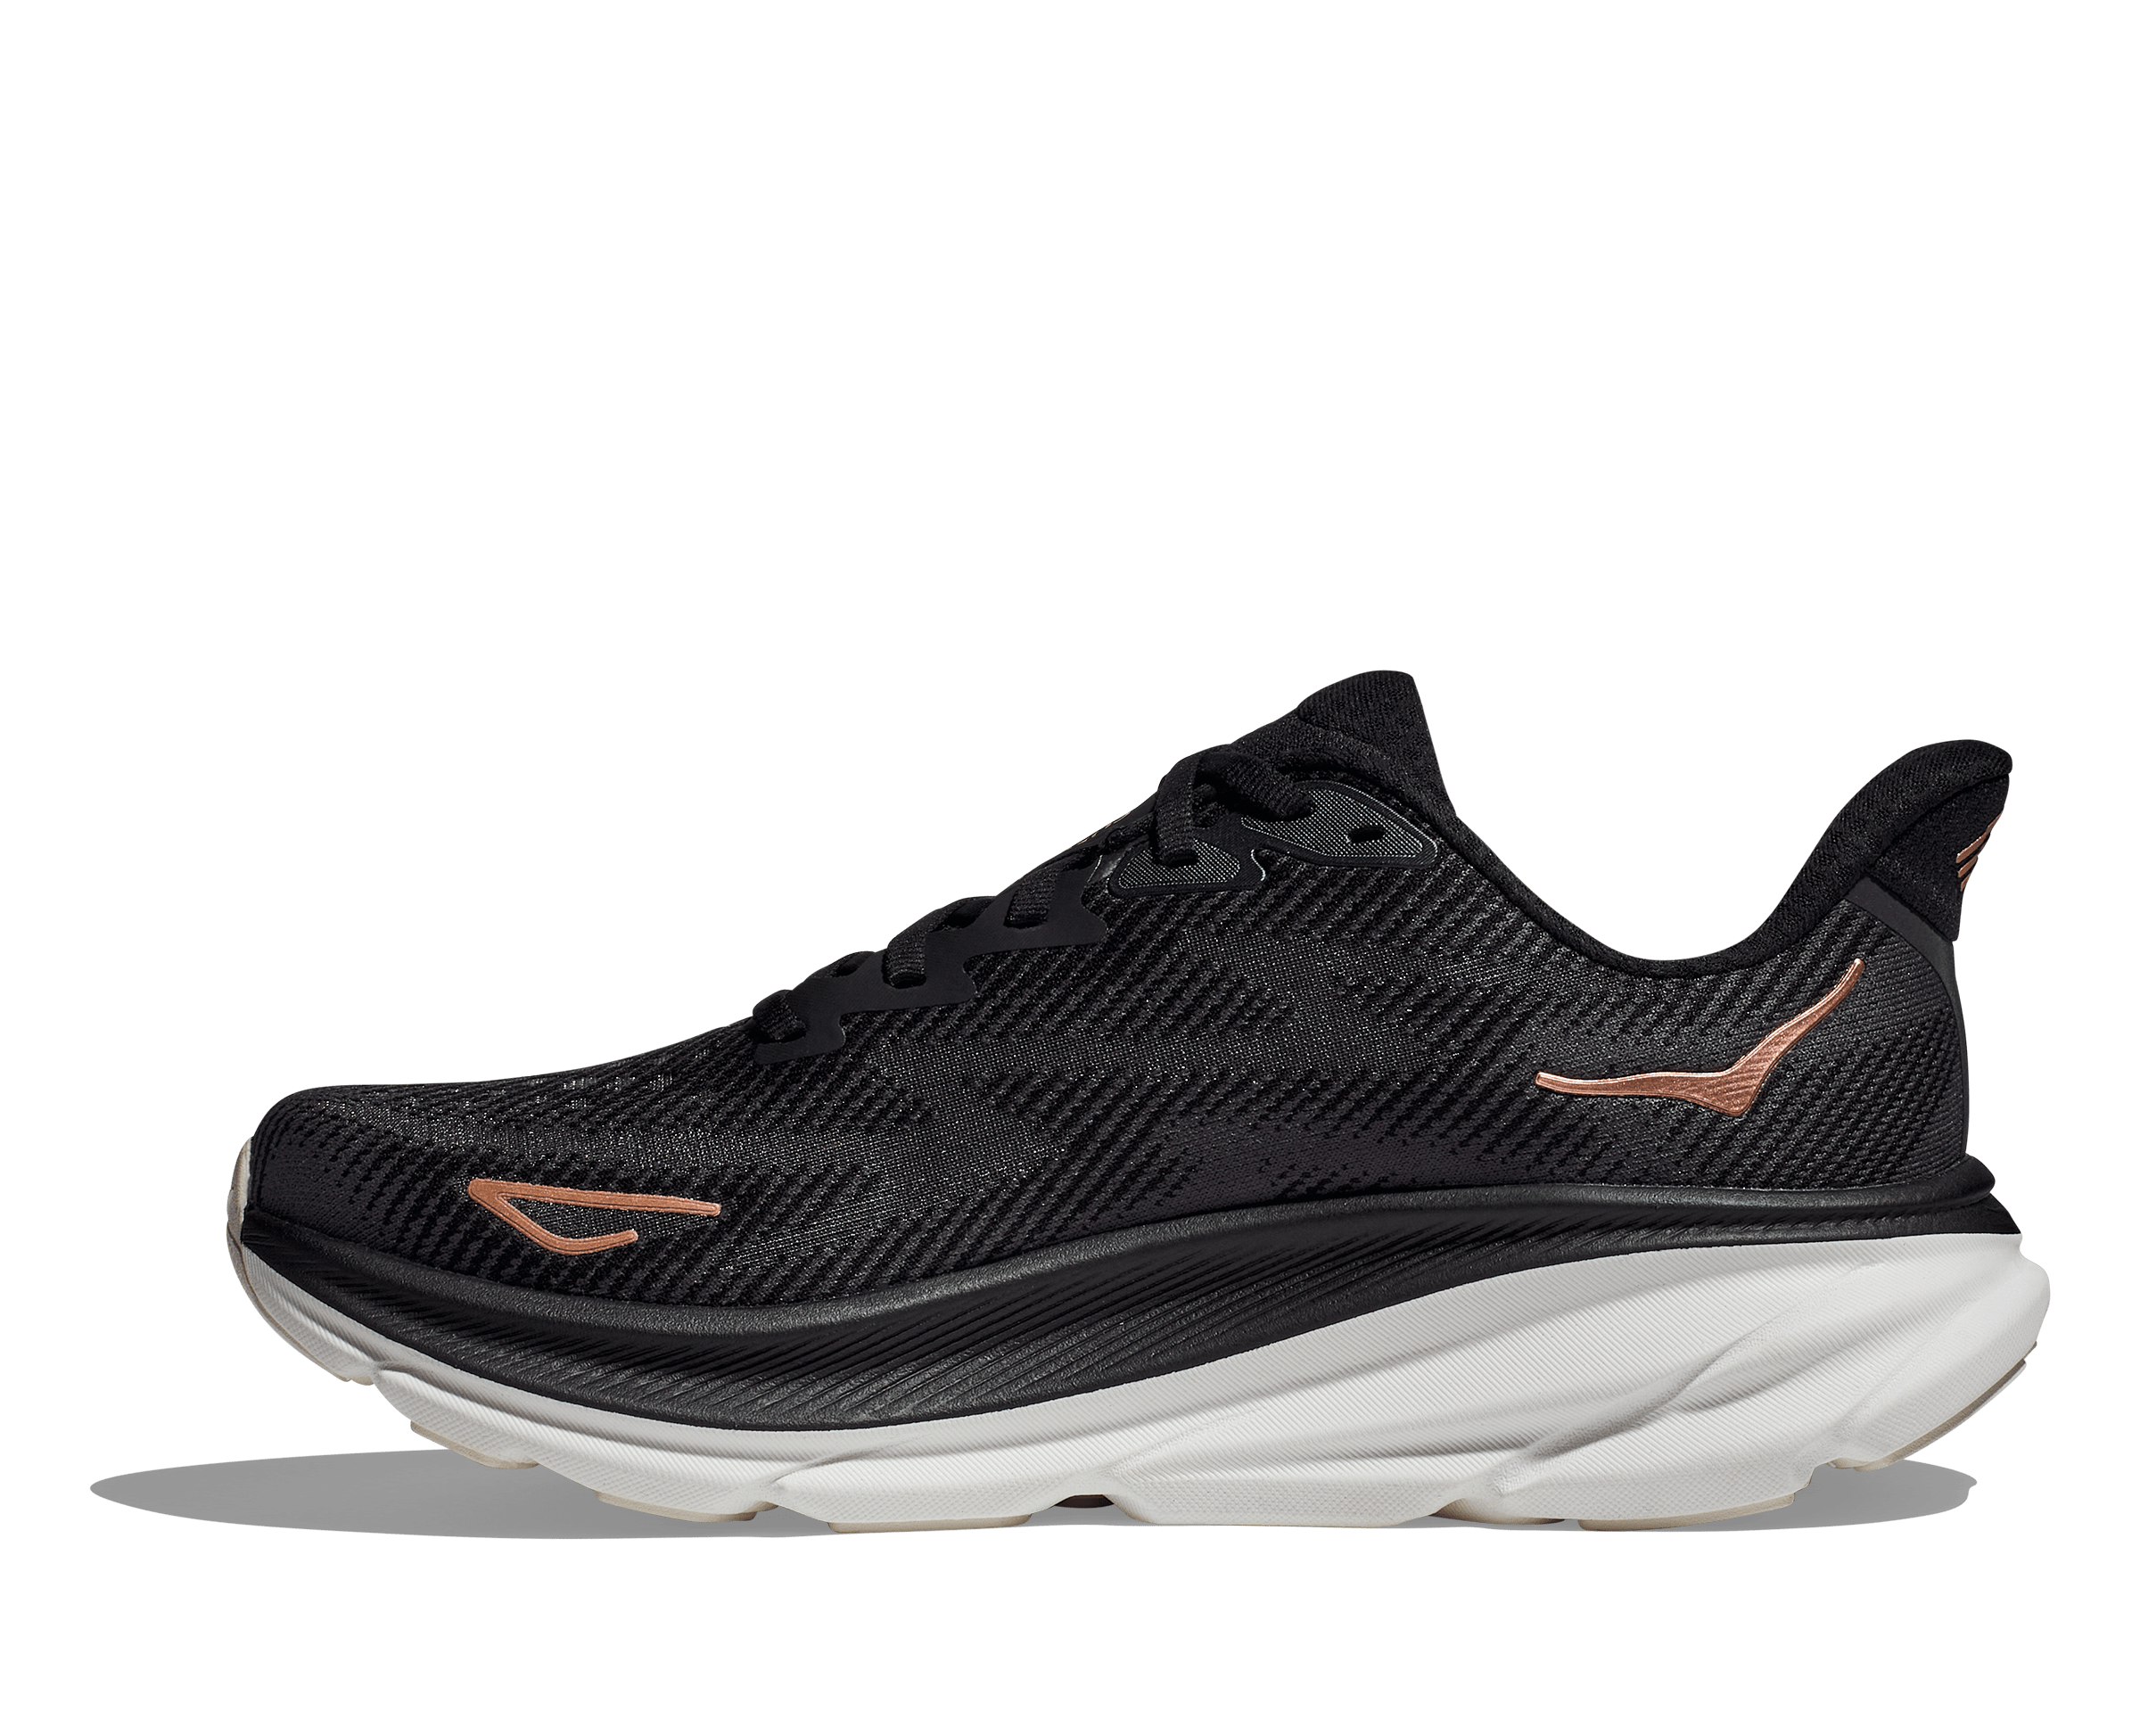 Medial view of the Women's Clifton 9 by HOKA in the color Black/Rose Gold